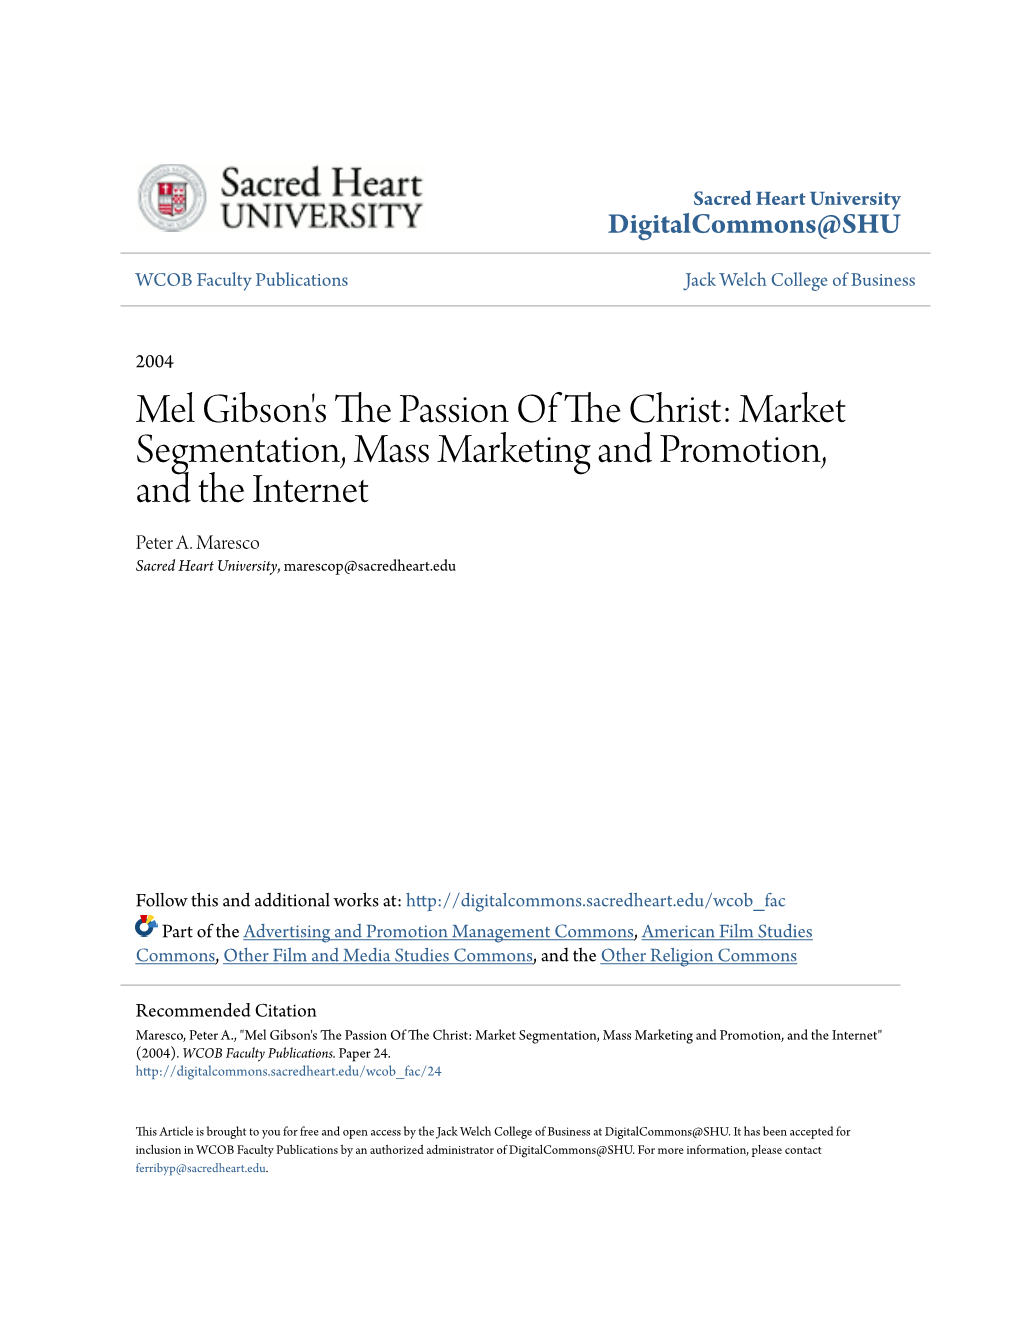 Mel Gibson's the Passion of the Christ : Market Segmentation, Mass Marketing and Promotion, and the Internet